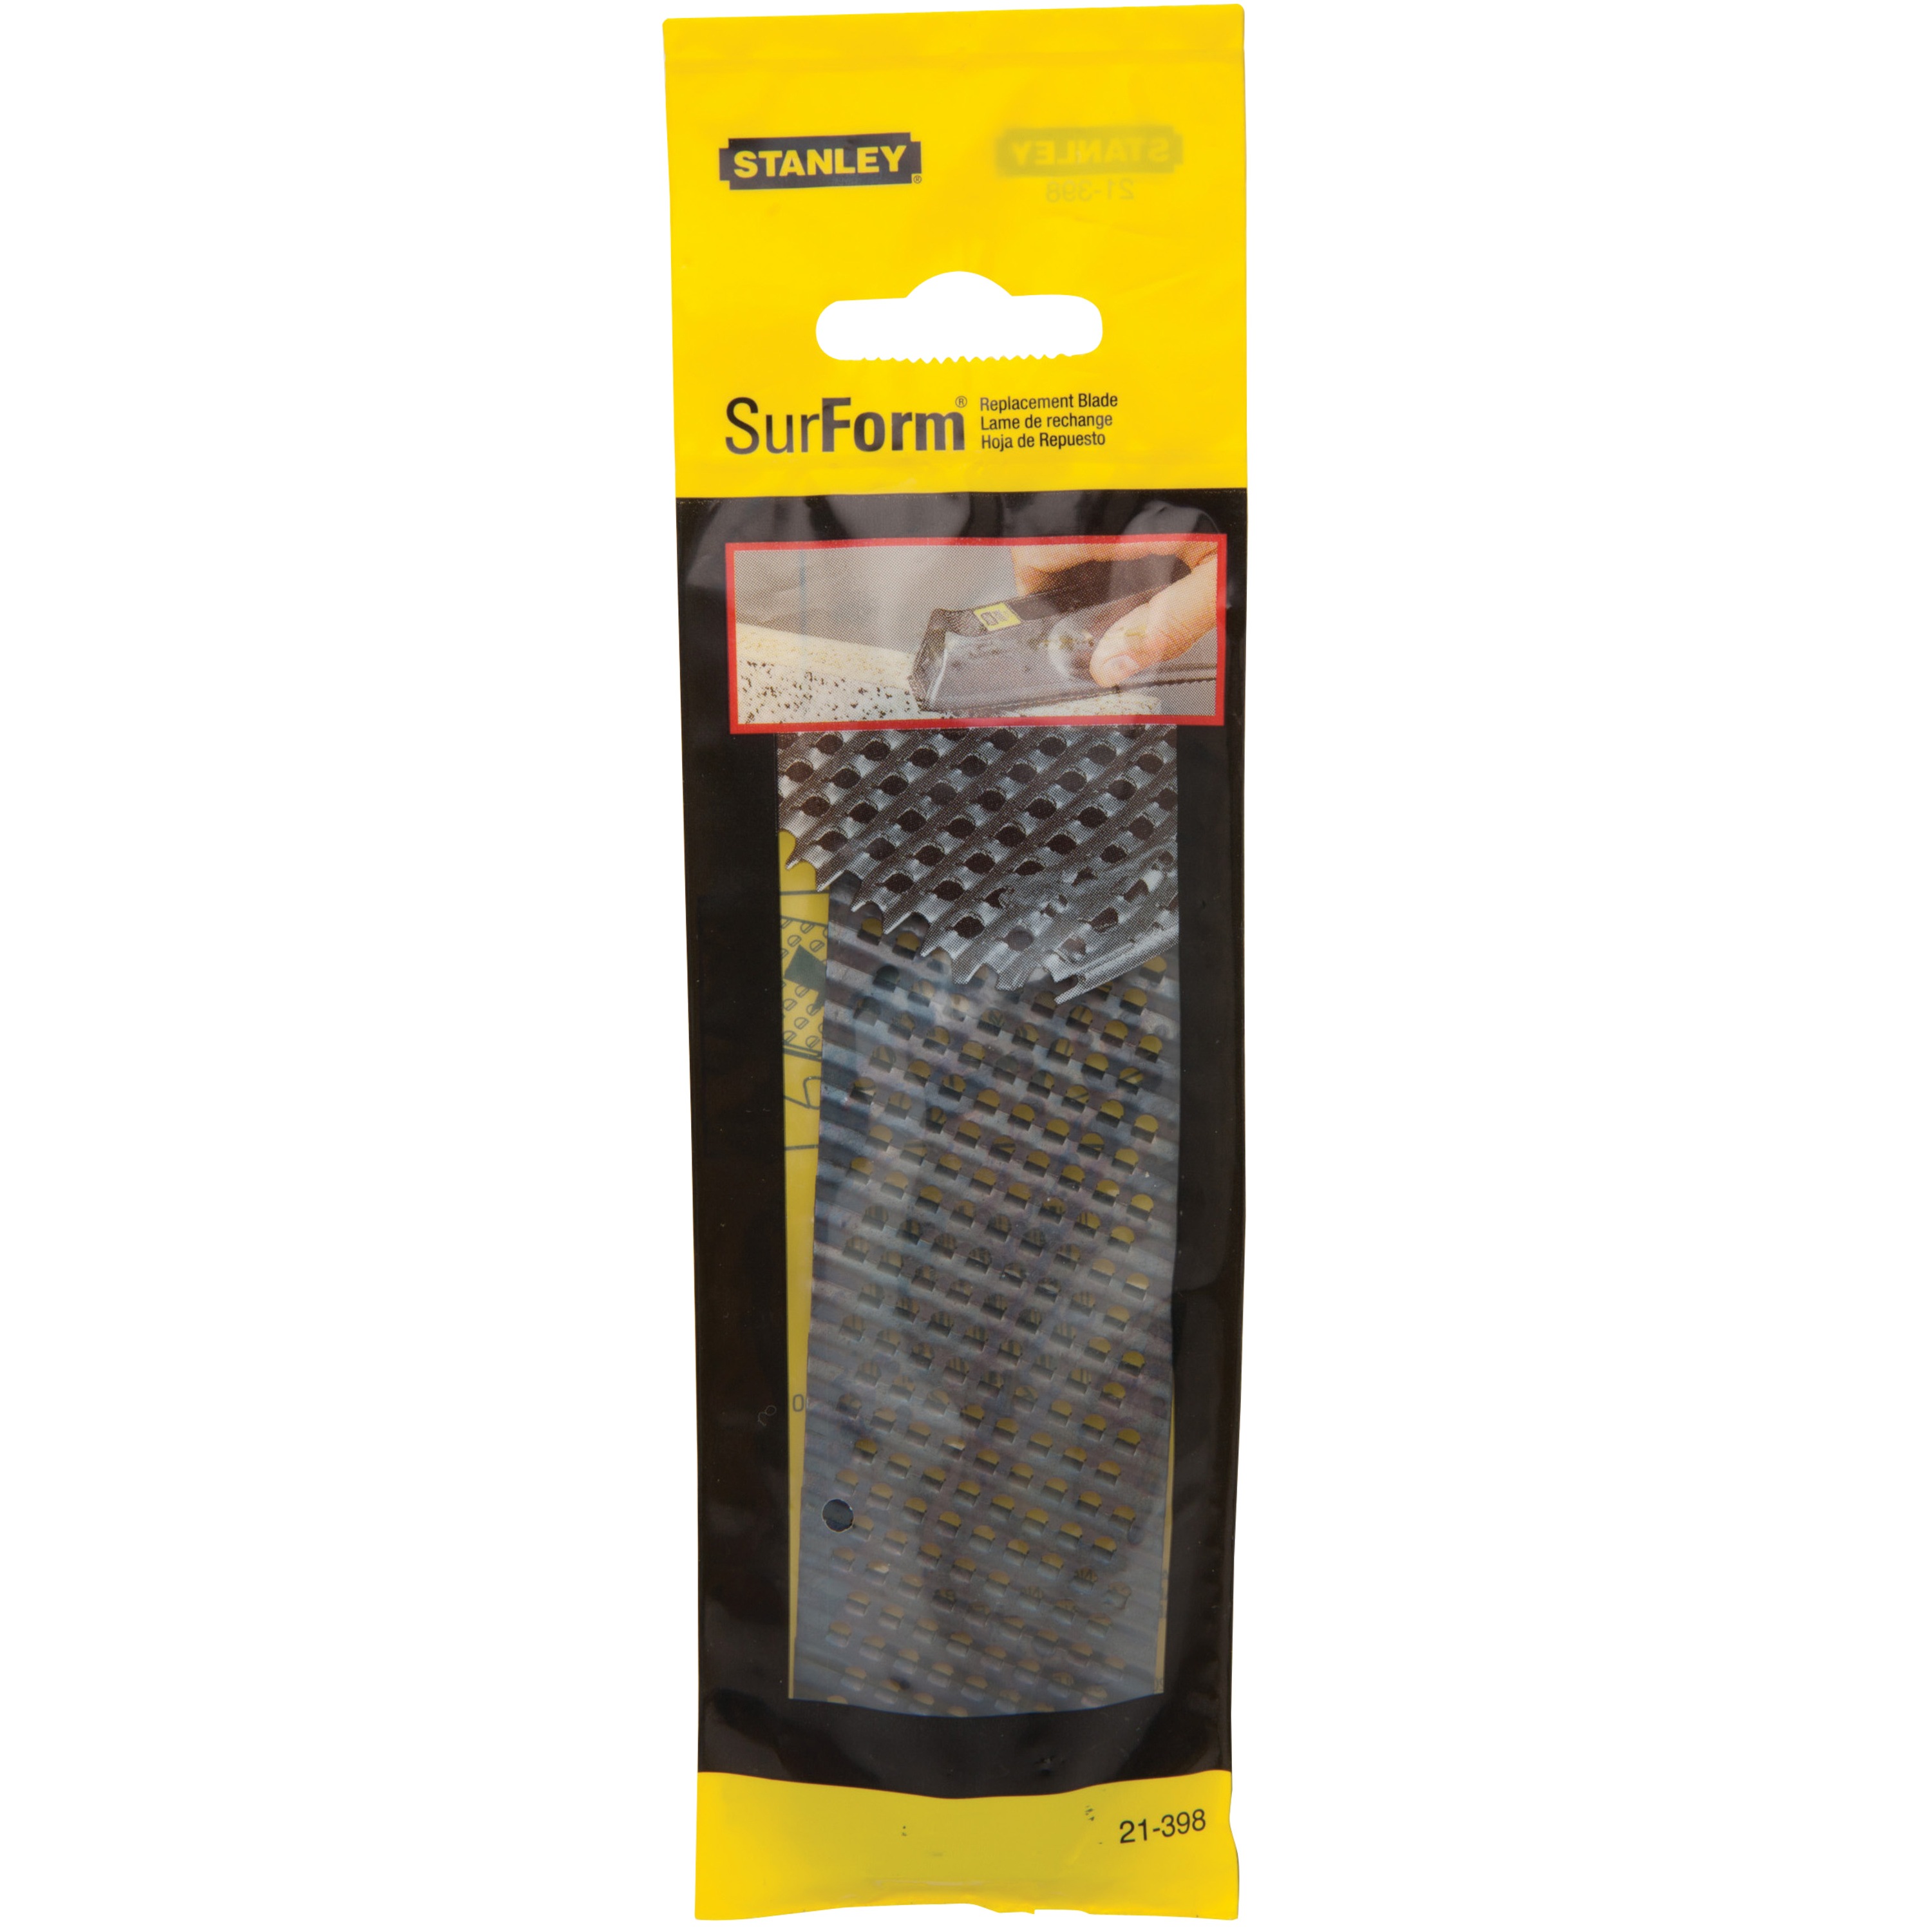 Stanley Tools - 512 in Surform Pocket Fine Cut Replacement Blade - 21-398